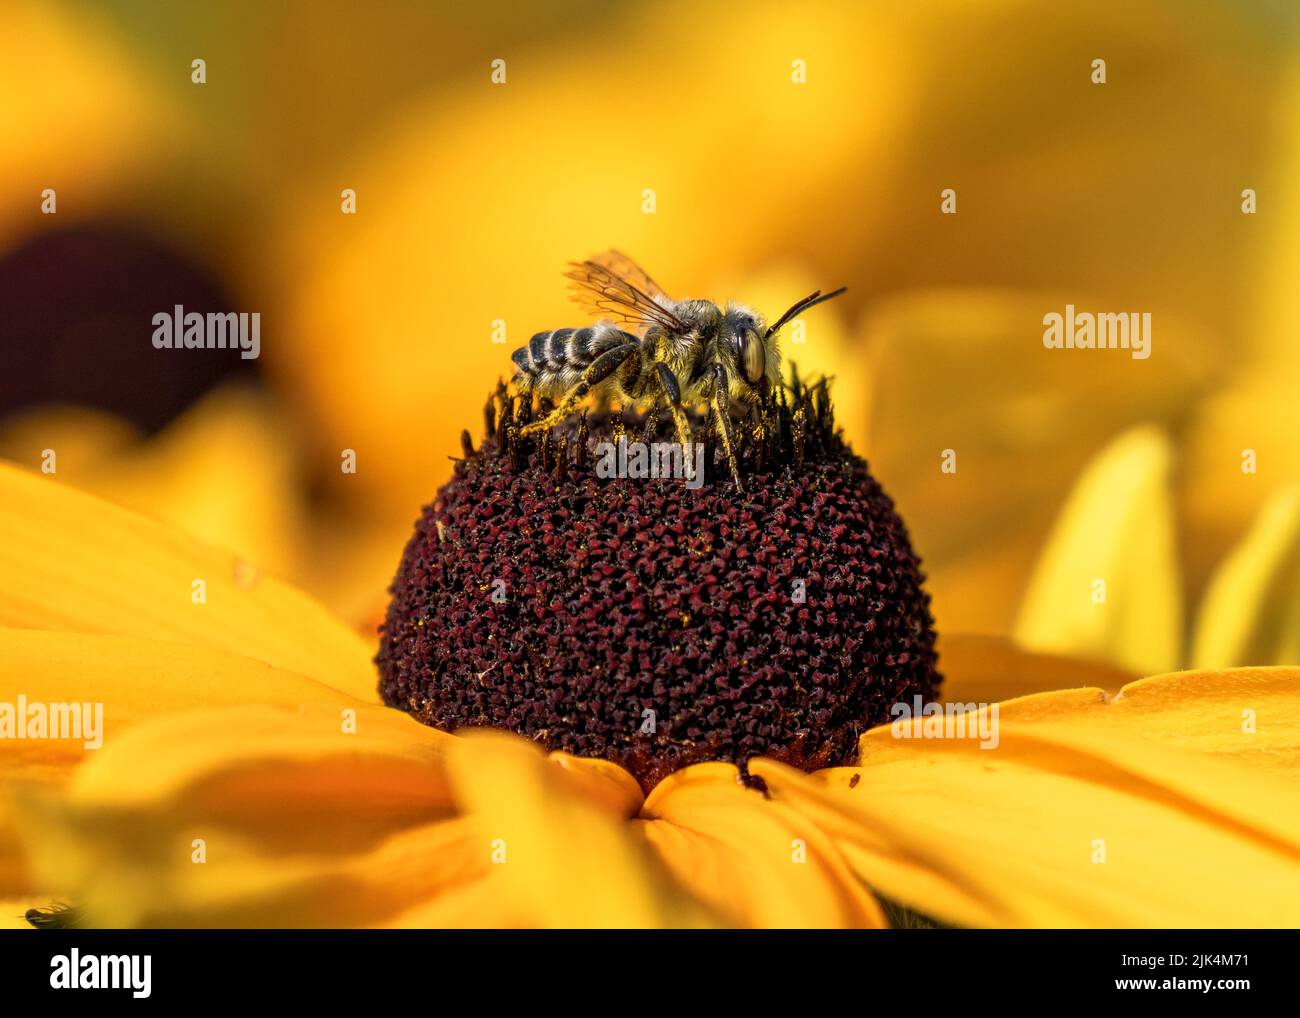 Closeup portrait of a Leafcutter bee in side profile atop a coneflower with a yellow garden background. Stock Photo